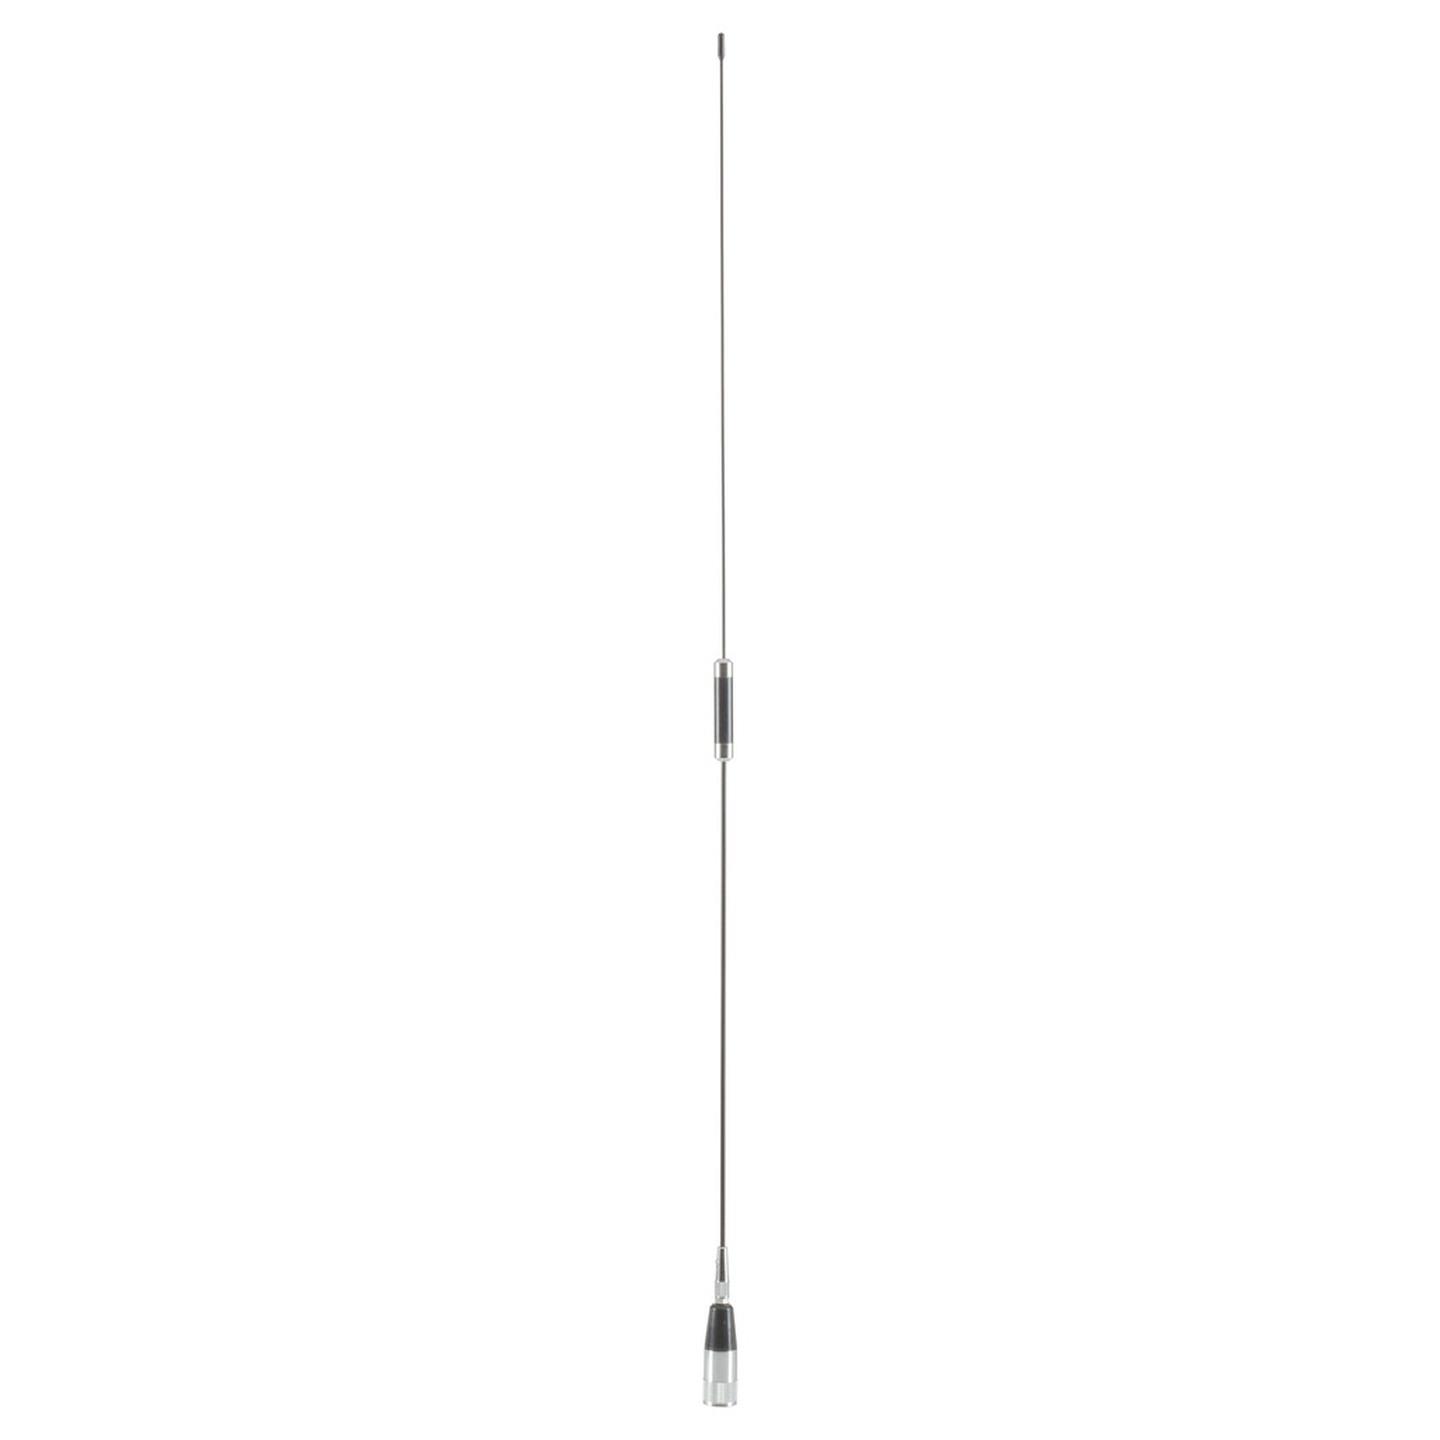 CB Radio Antenna with Base and 5m Cable